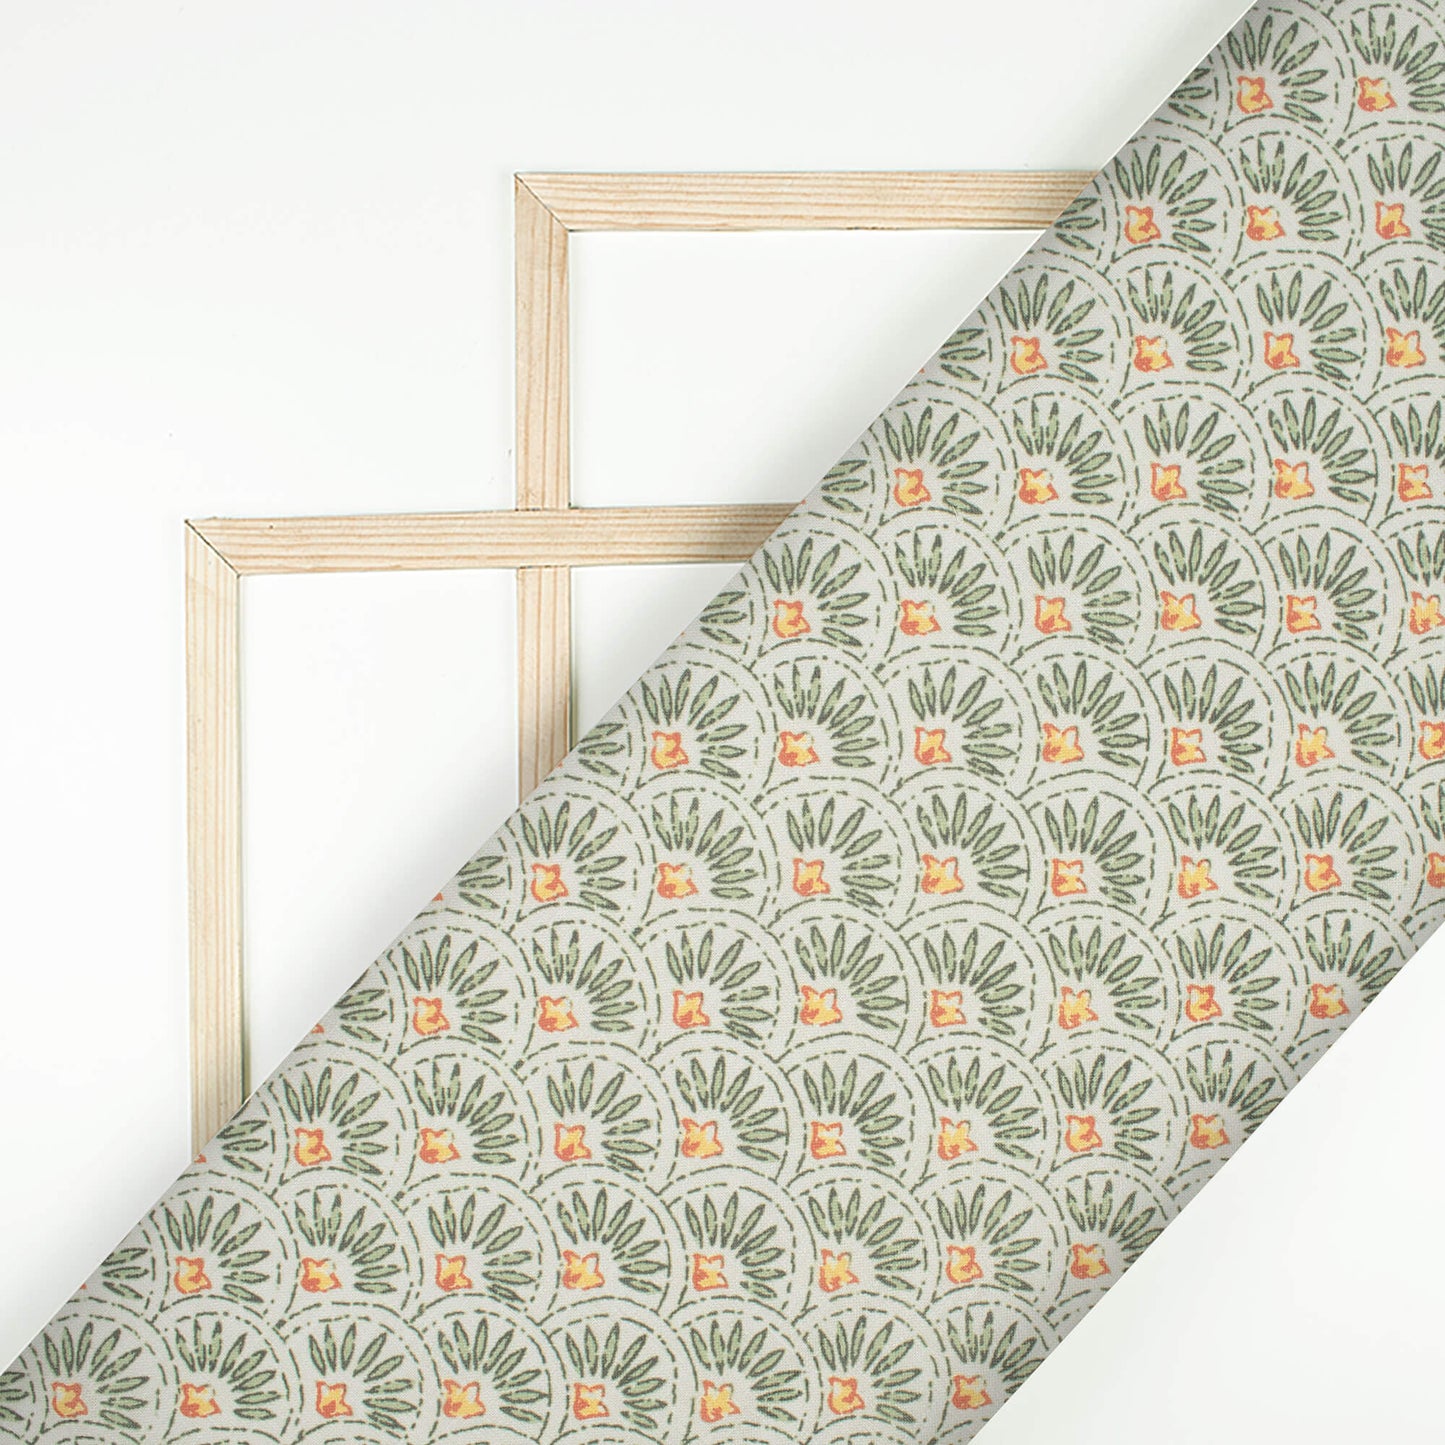 Pastel Green And Yellow Floral Pattern Digital Print Linen Textured Fabric (Width 56 Inches)